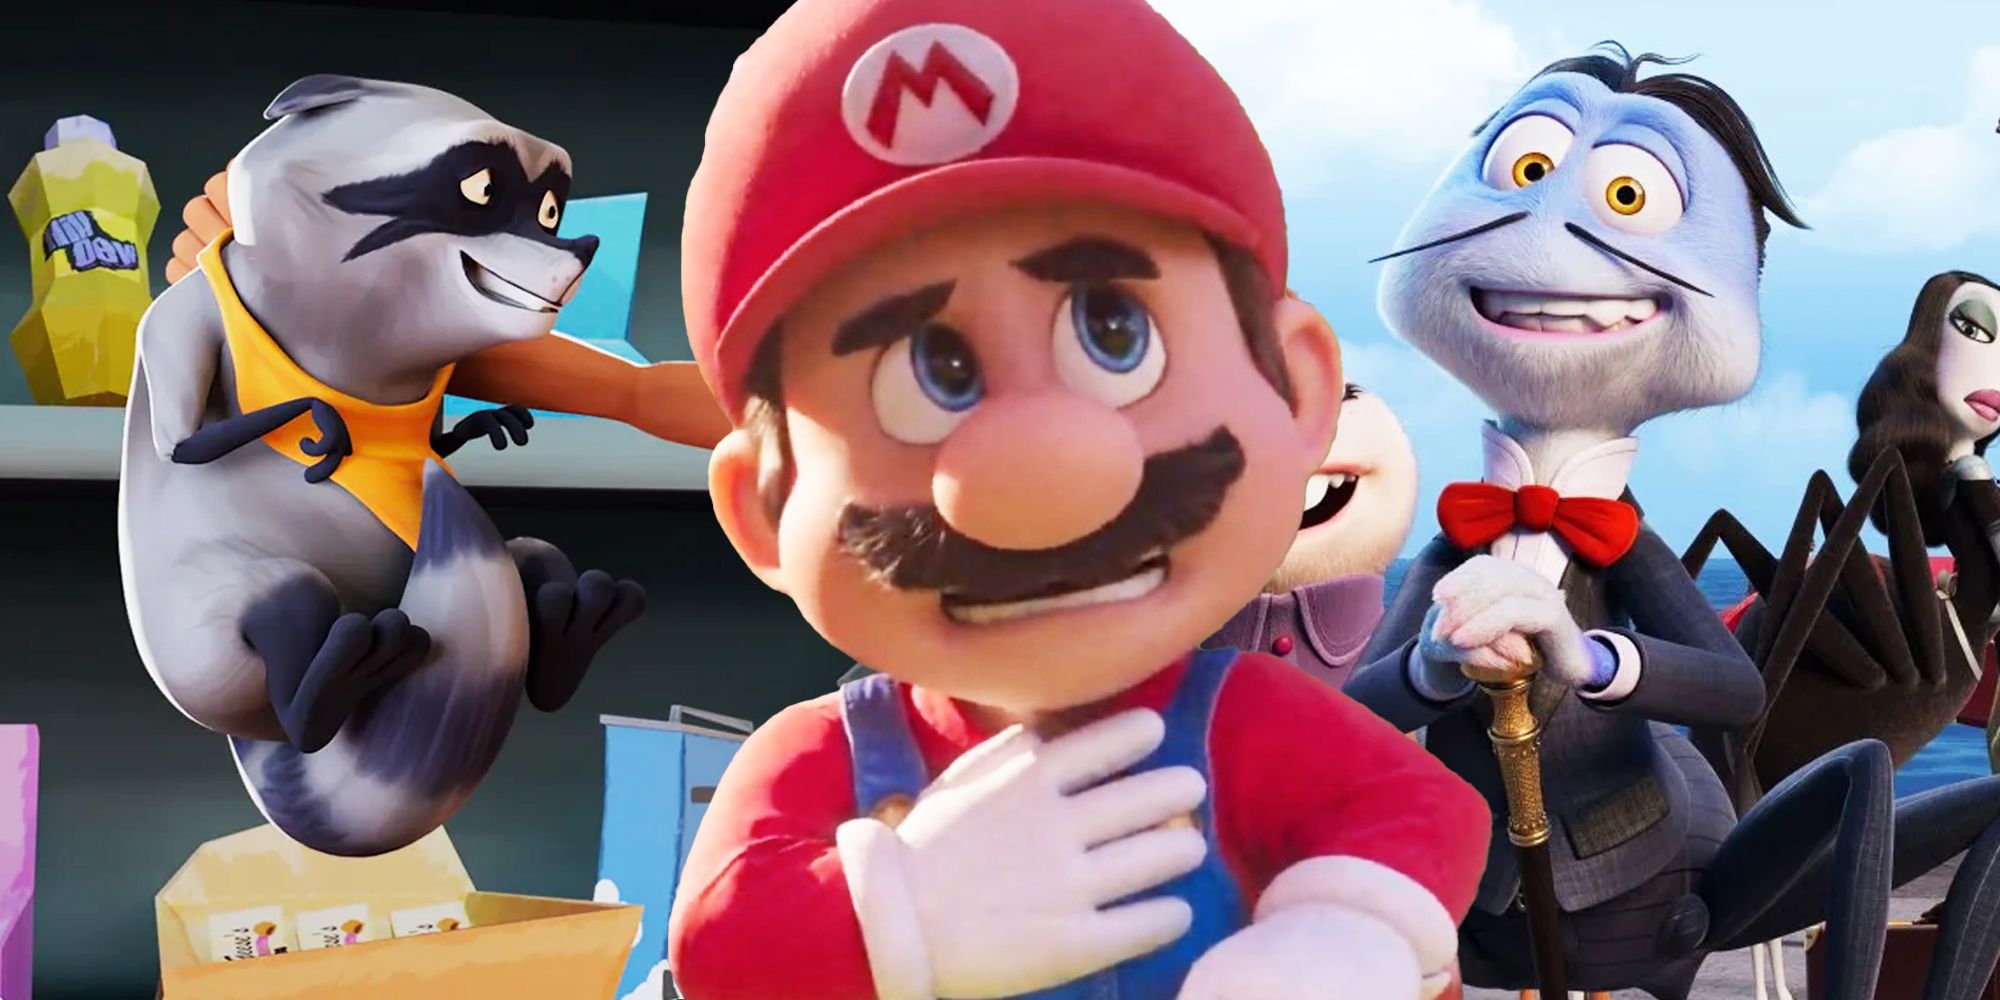 Mario, Inspector Sun, and Three Raccoons in a Trench Coat copy